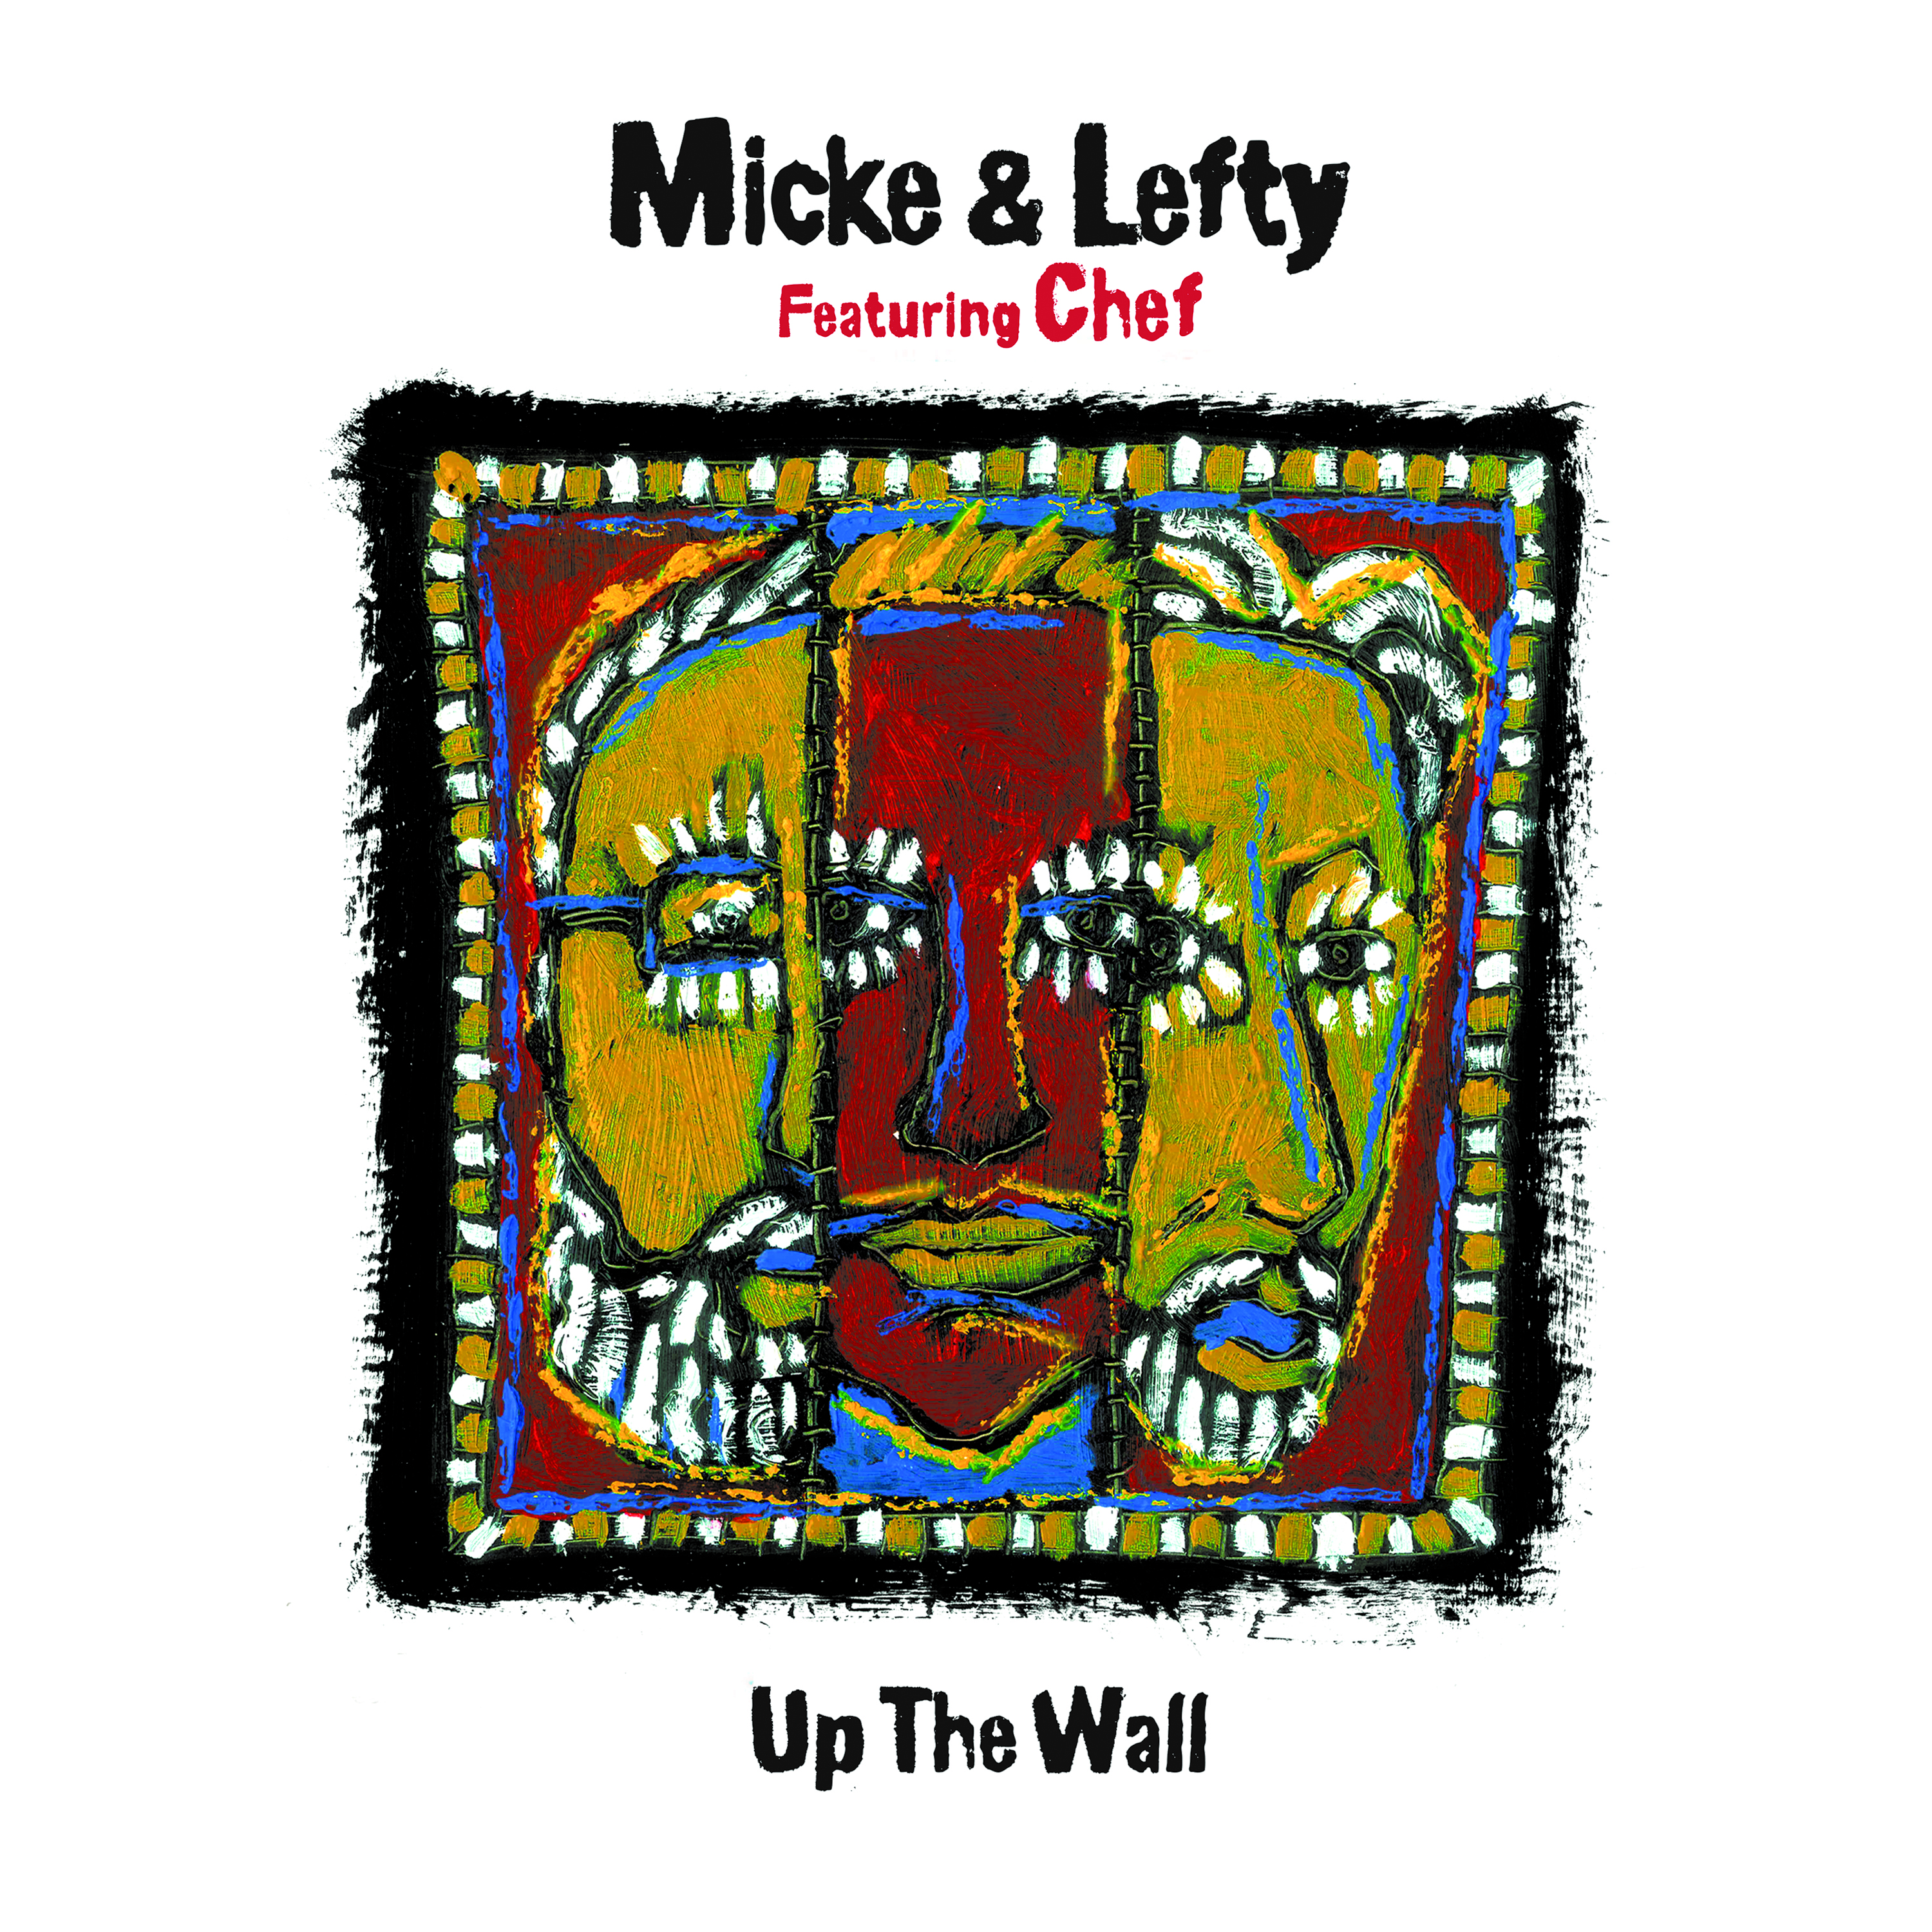 Micke & Lefty feat. Chef - Up The Wall (180 gram white vinyl)